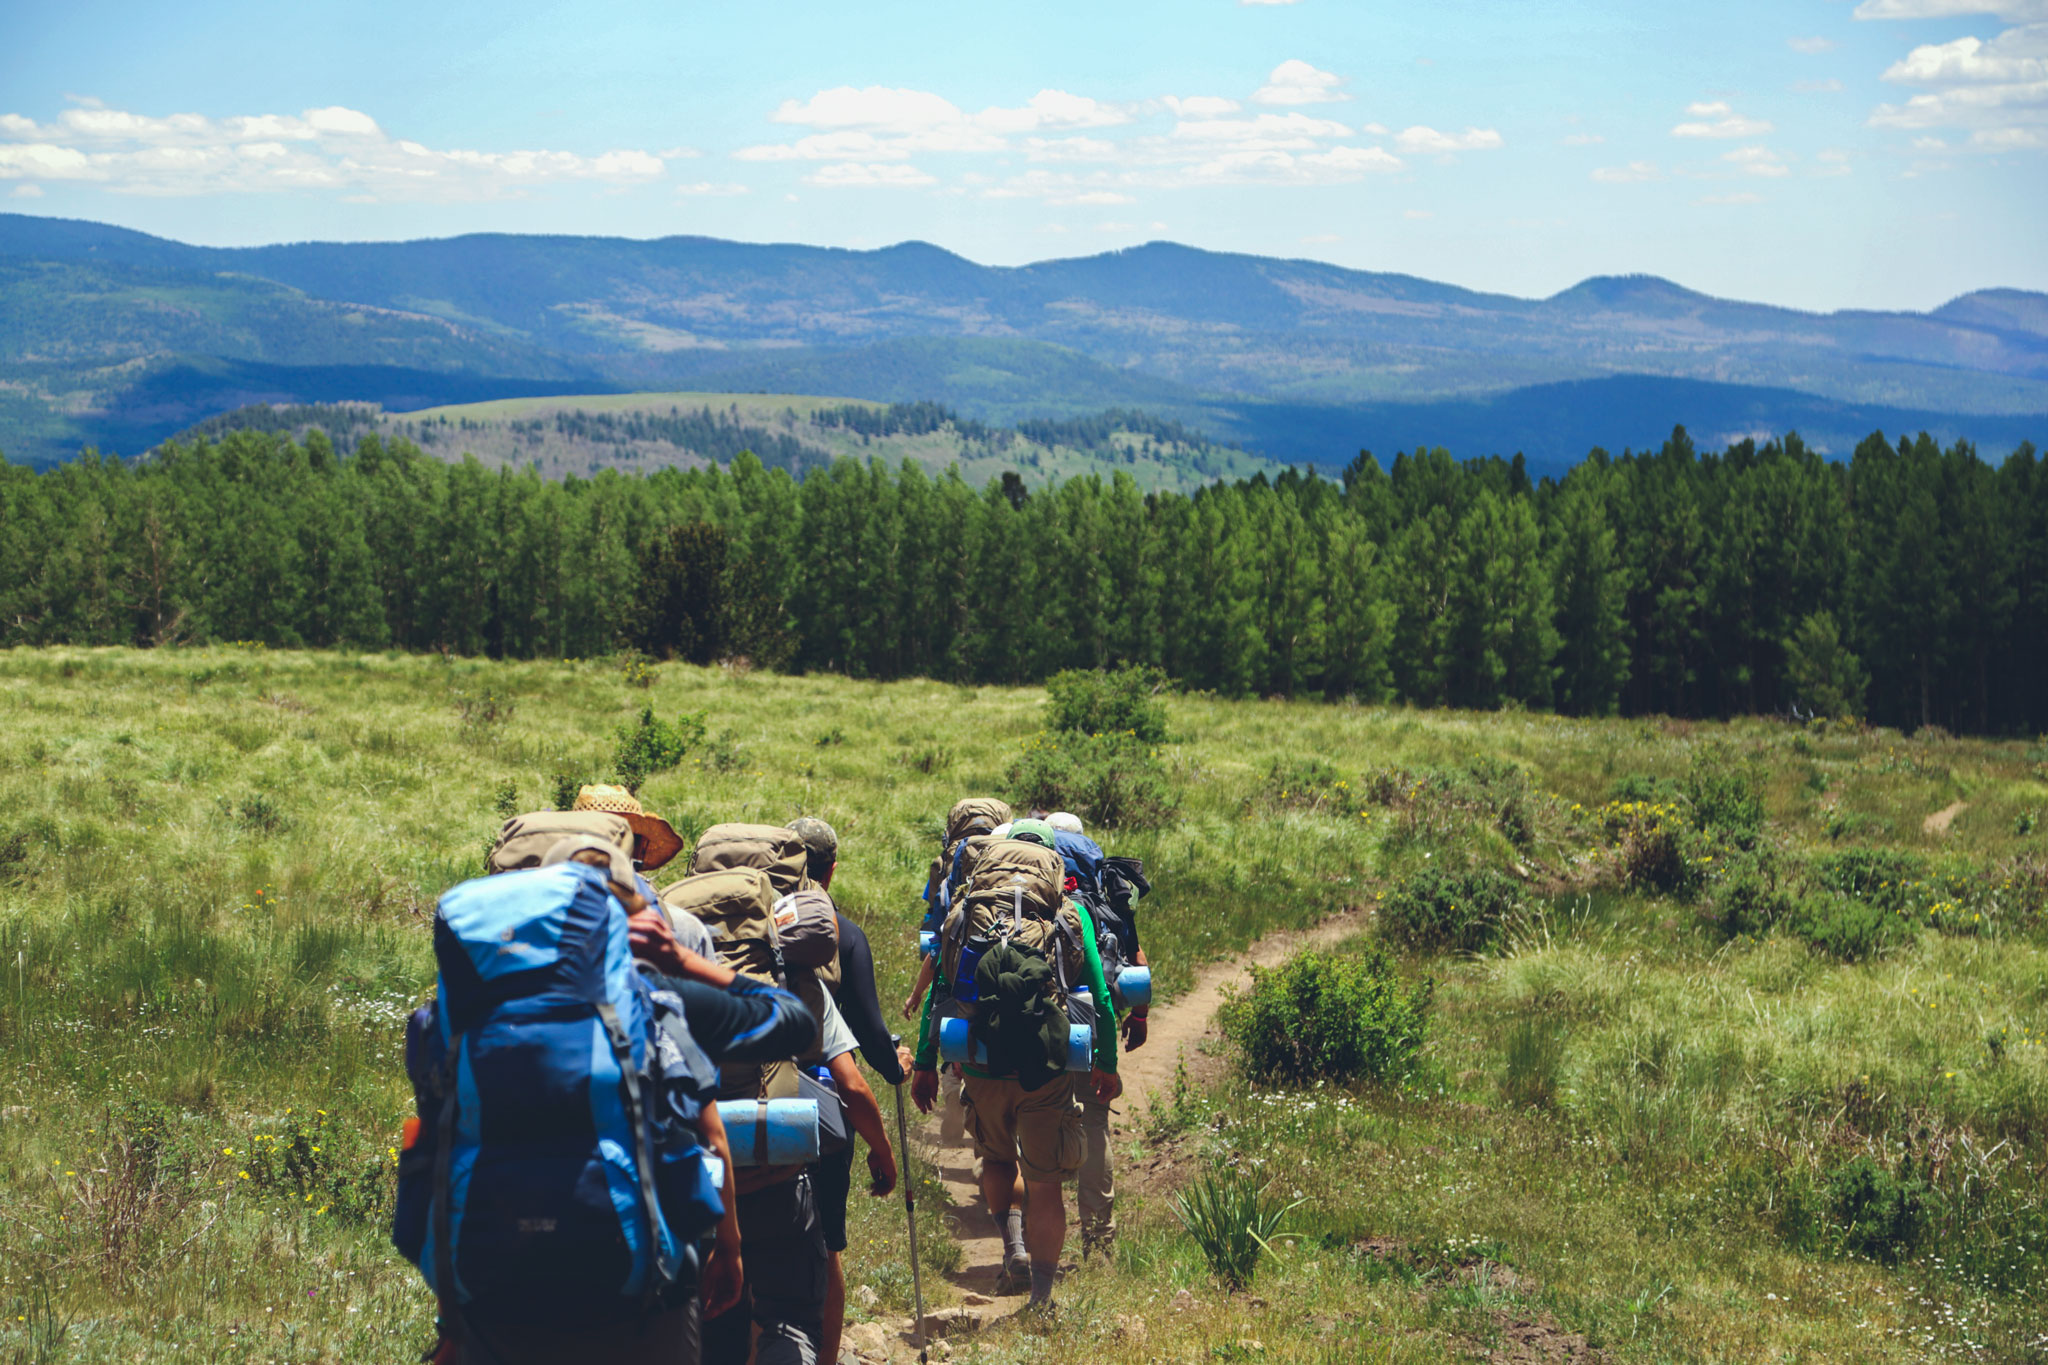 group of hikers walking on the path karkonosze mountains